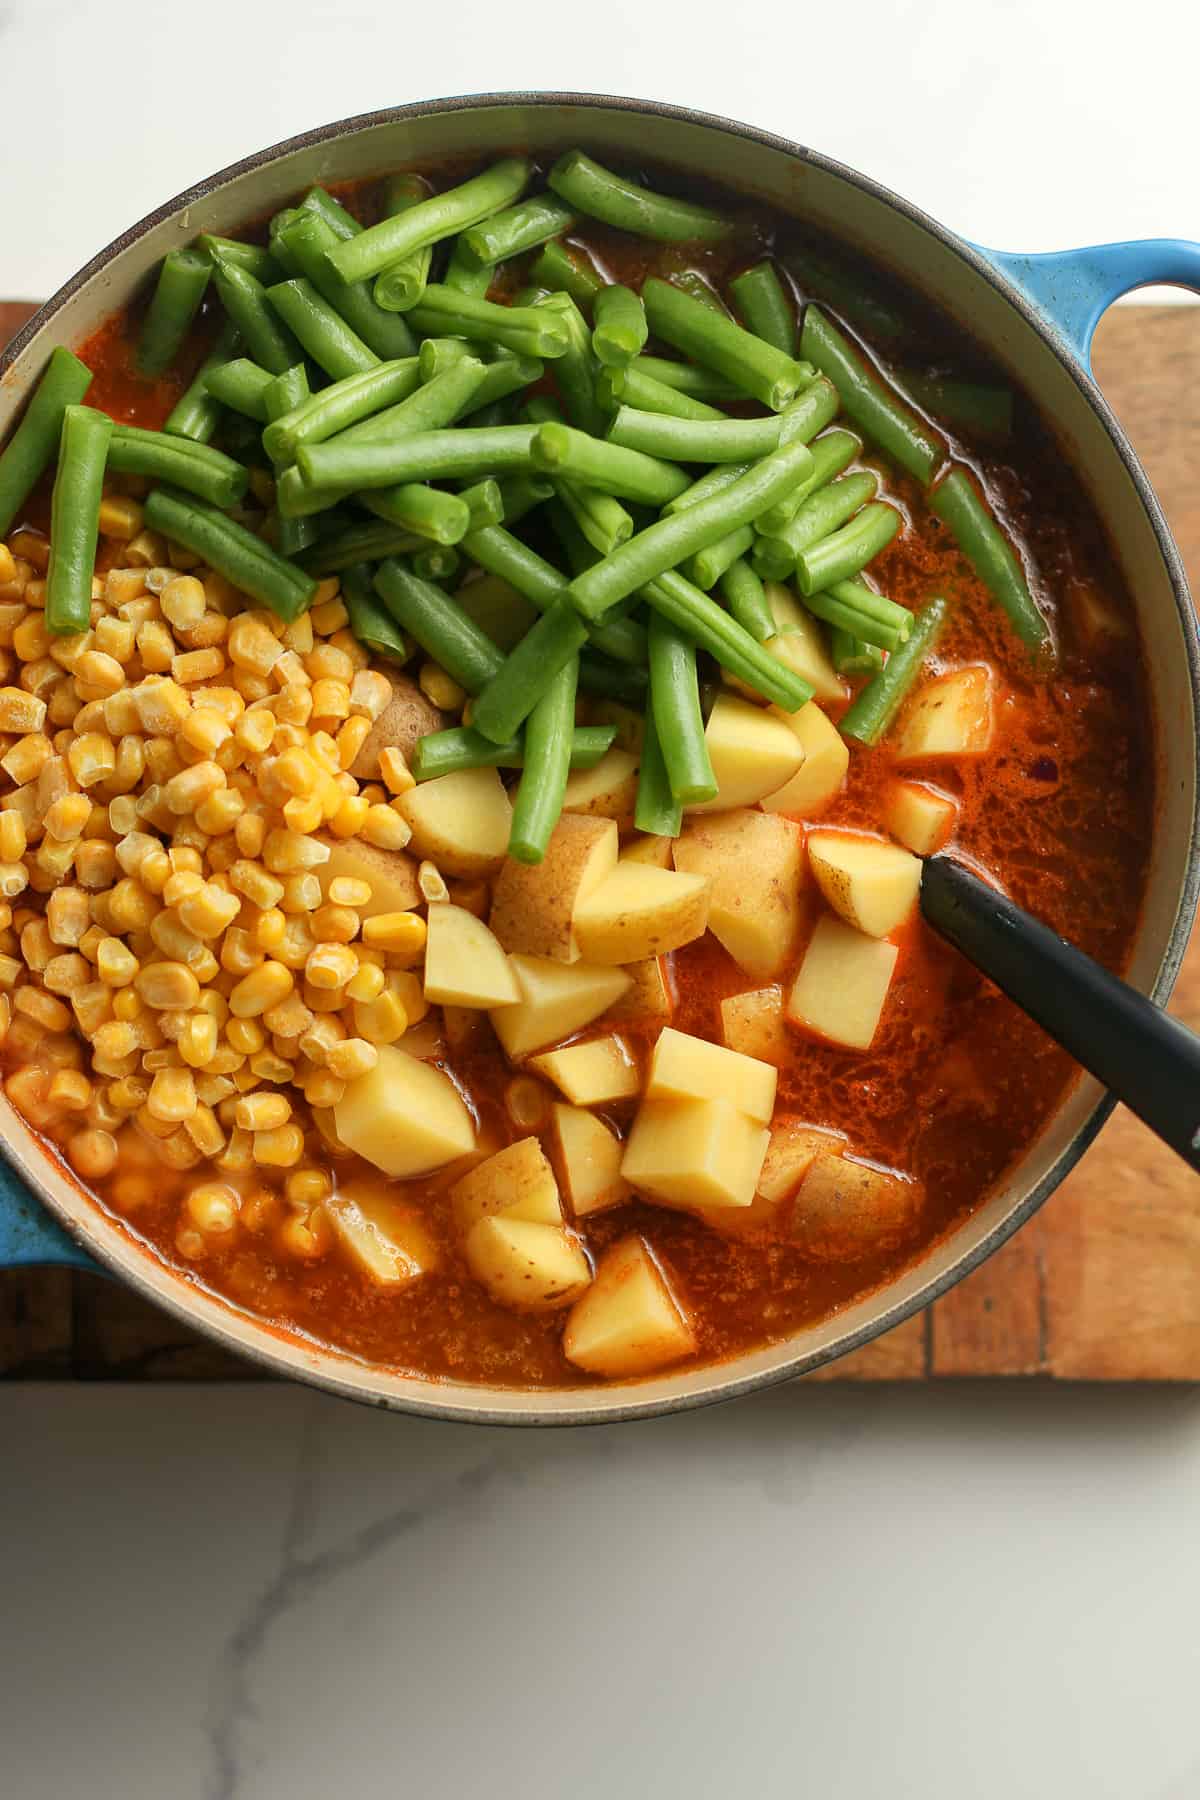 The soup with the corn, beans, and potatoes on top.